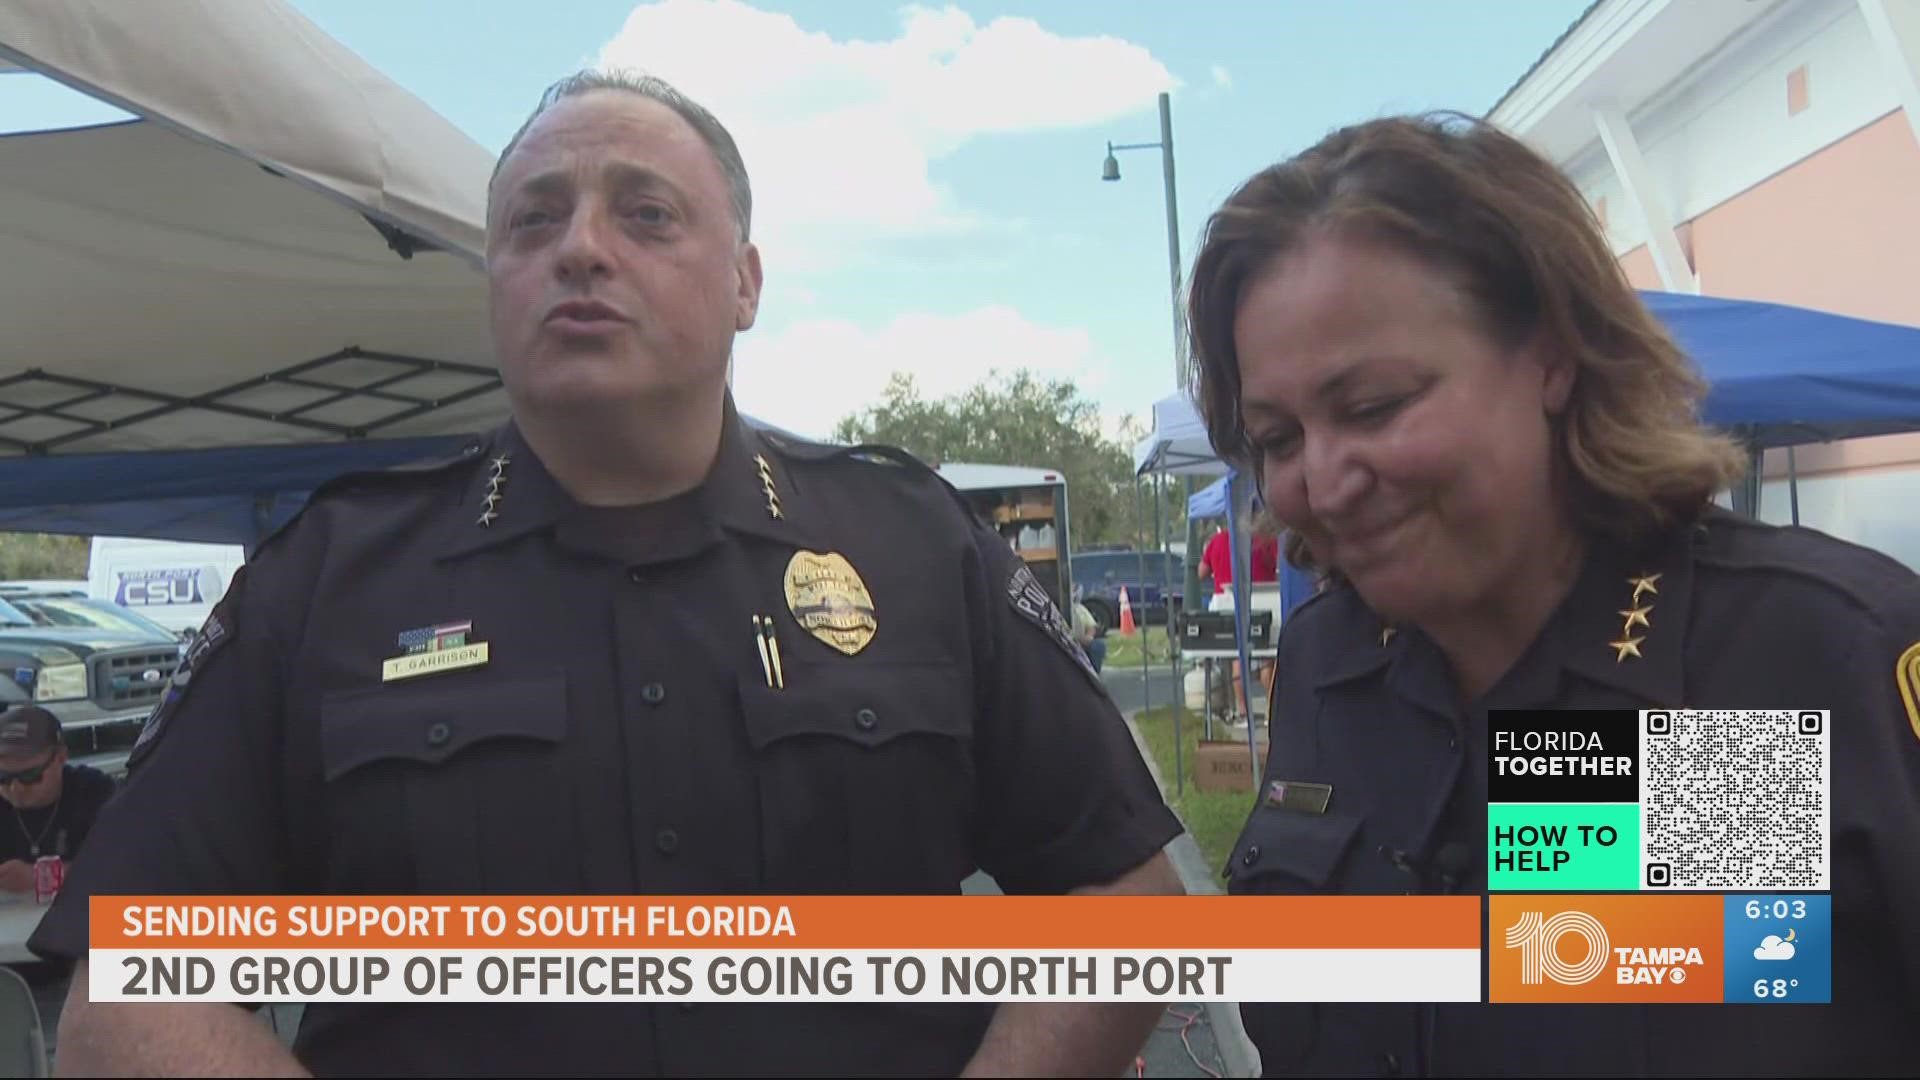 They are set to relieve a police crew that is already in North port.